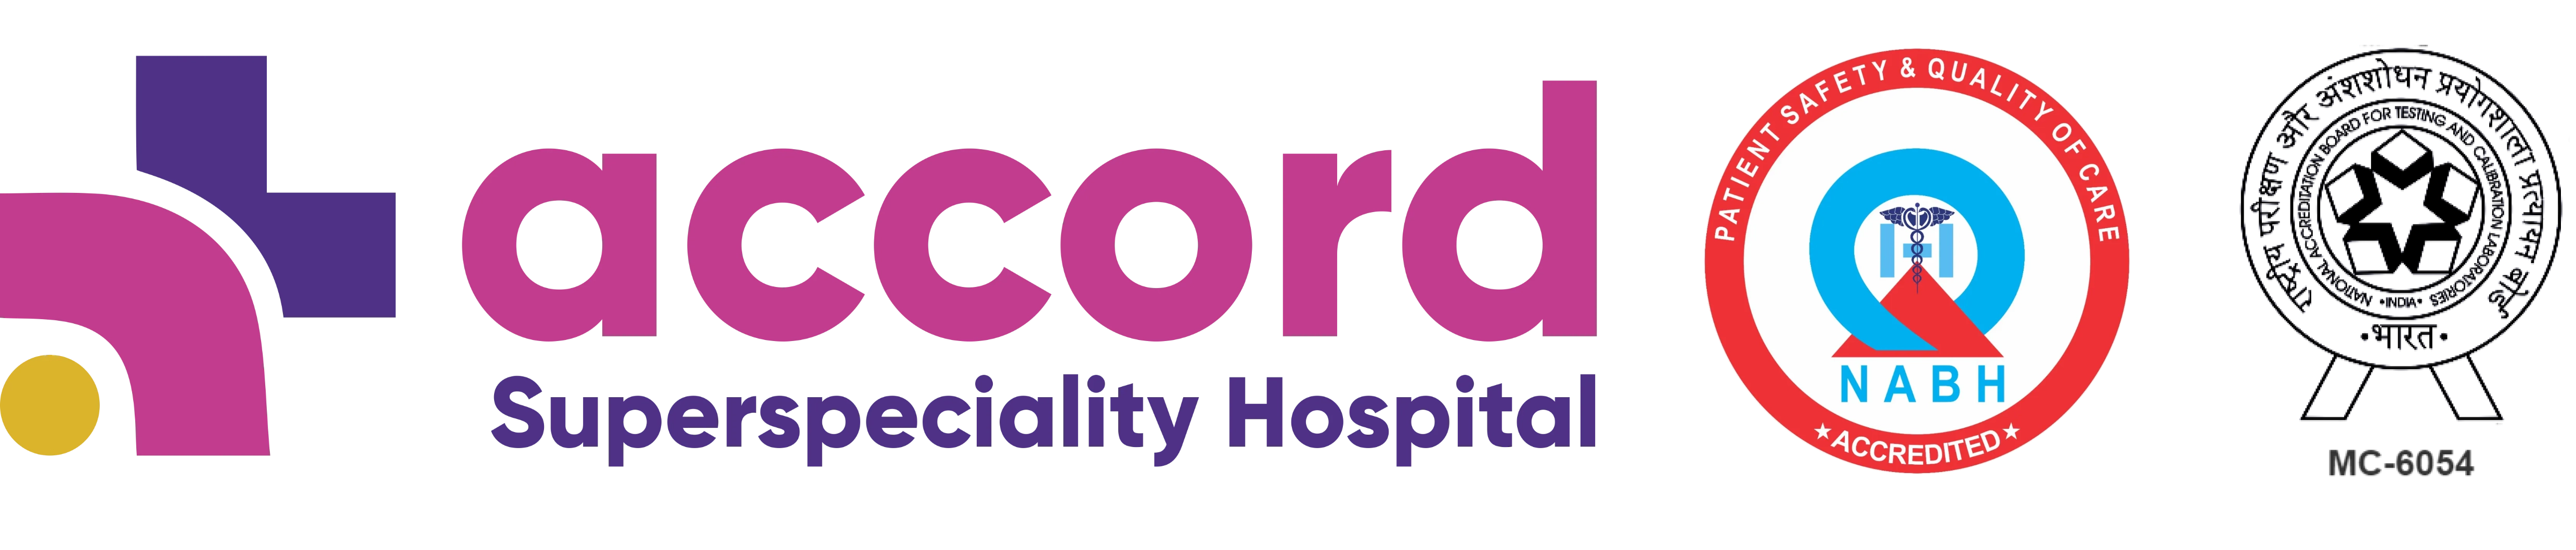 Accord Superspeciality Hospital logo